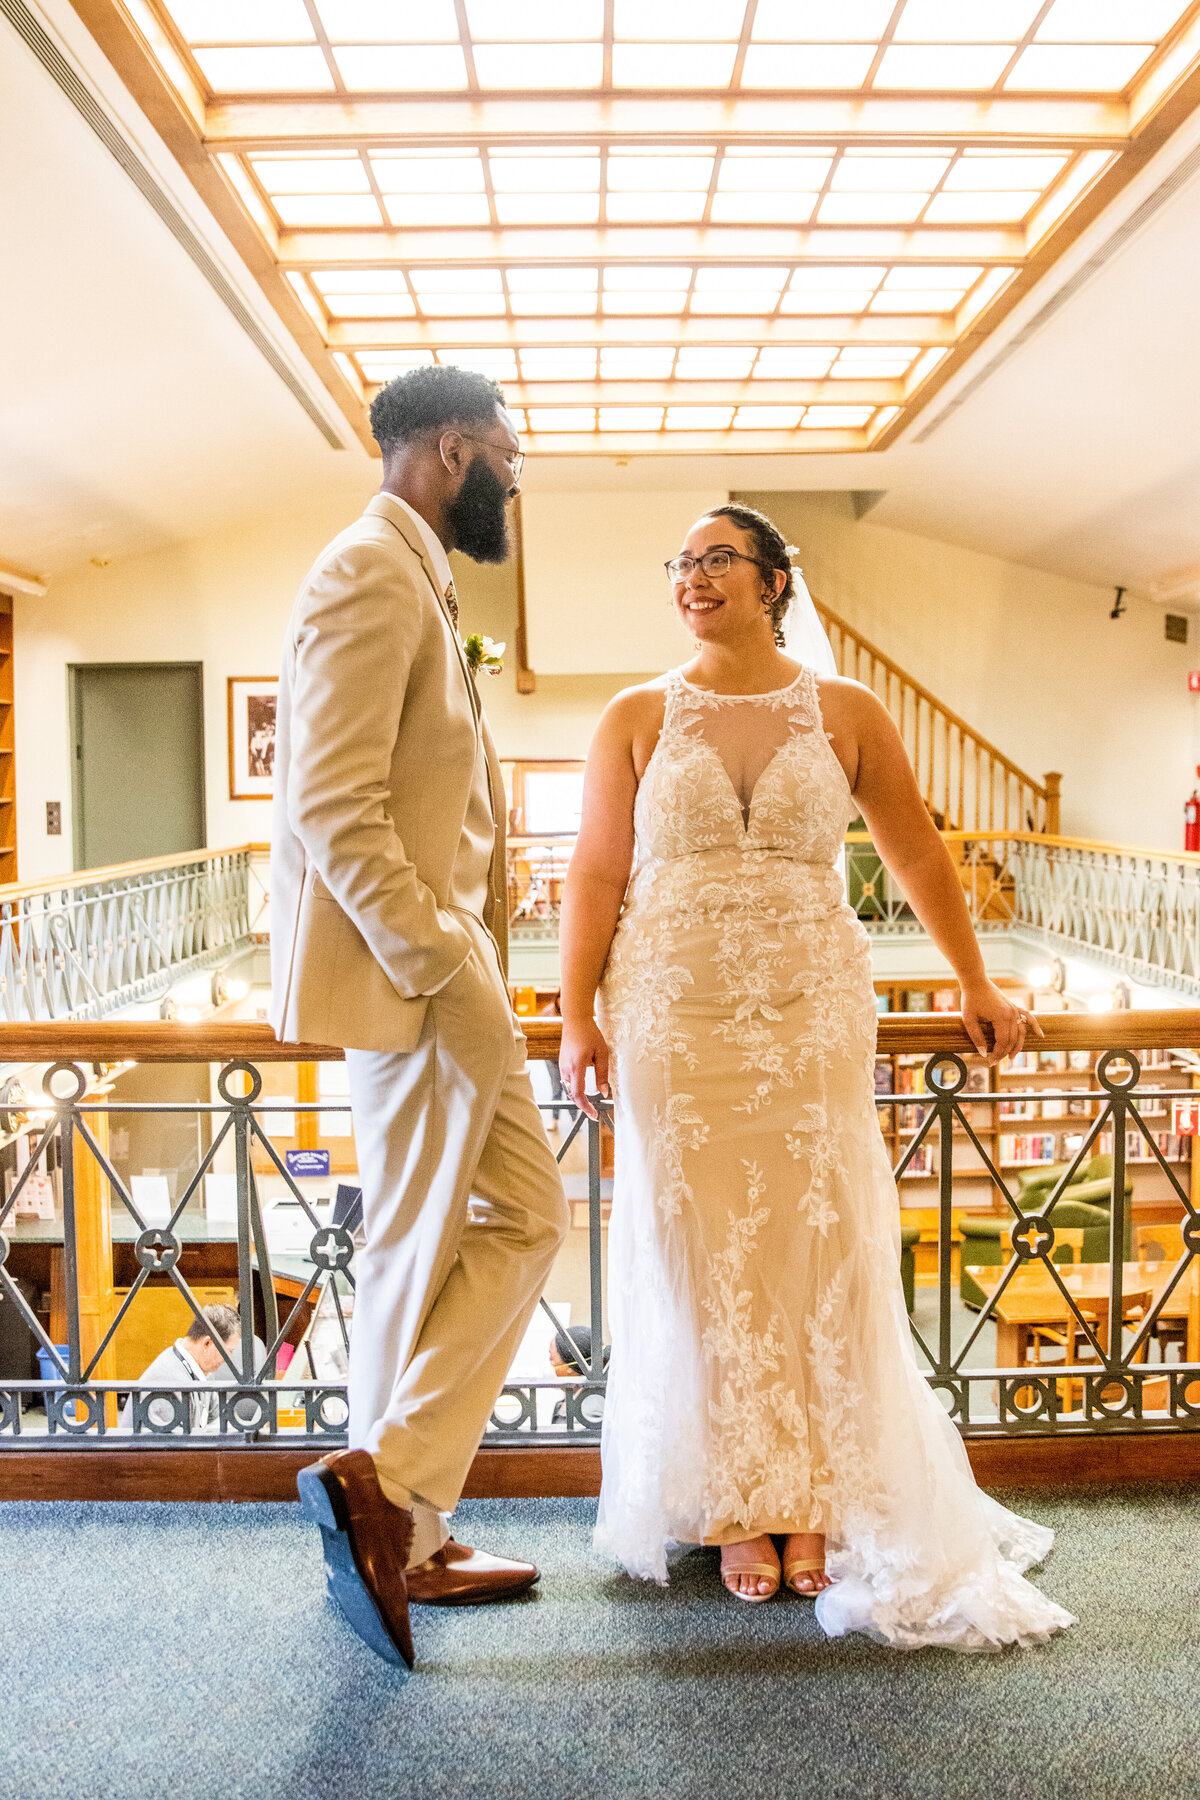 Bride and groom portrait at Saginaw's famous and historic Hoyt Library. Photo captured by Devin Ramon Photography.